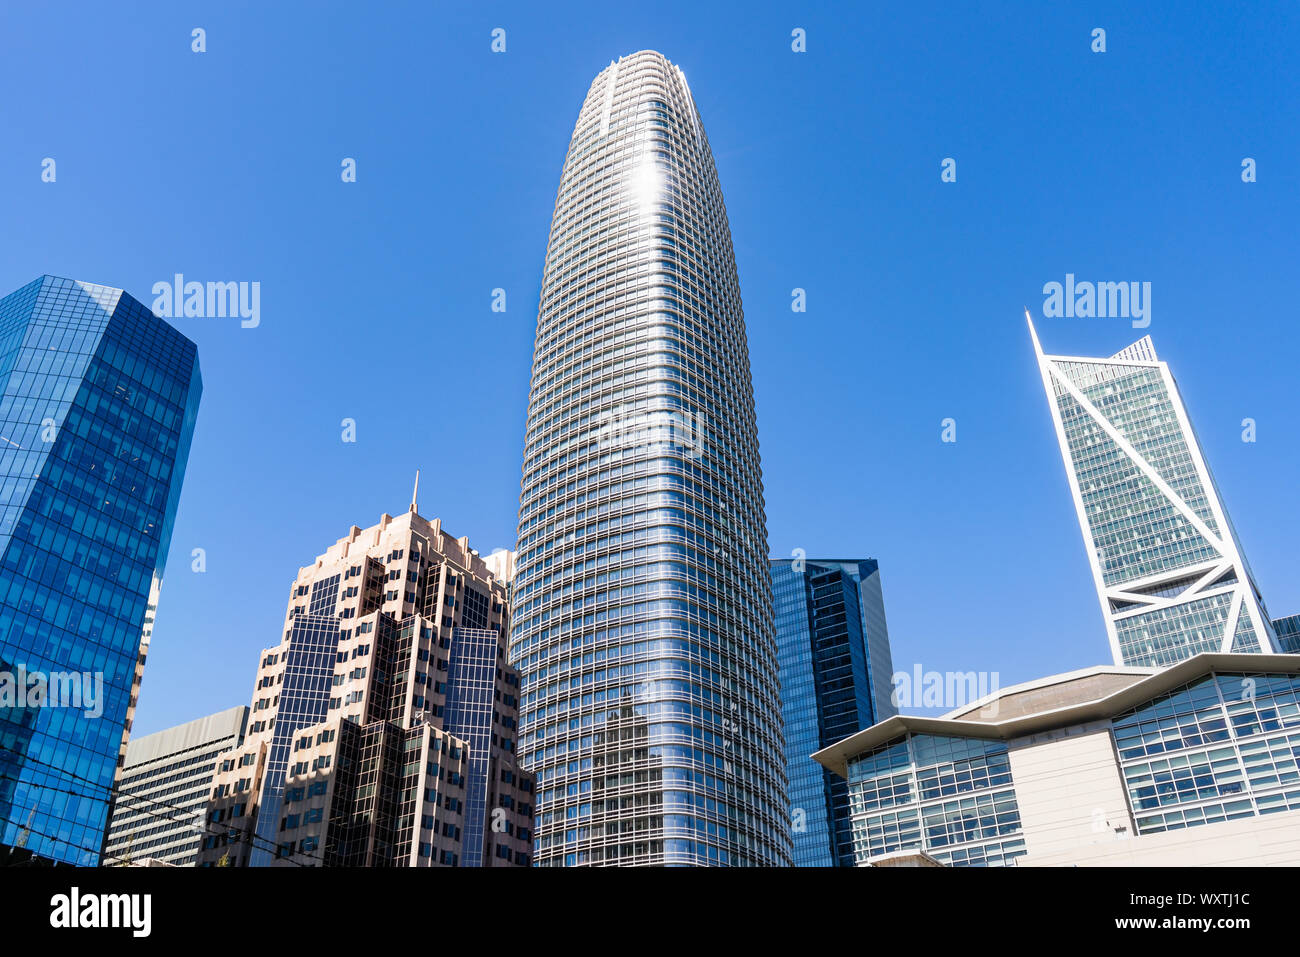 August 21, 2019 San Francisco / CA / USA - Salesforce tower rising above other skyscrapers and creating a new skyline in downtown San Francisco Stock Photo